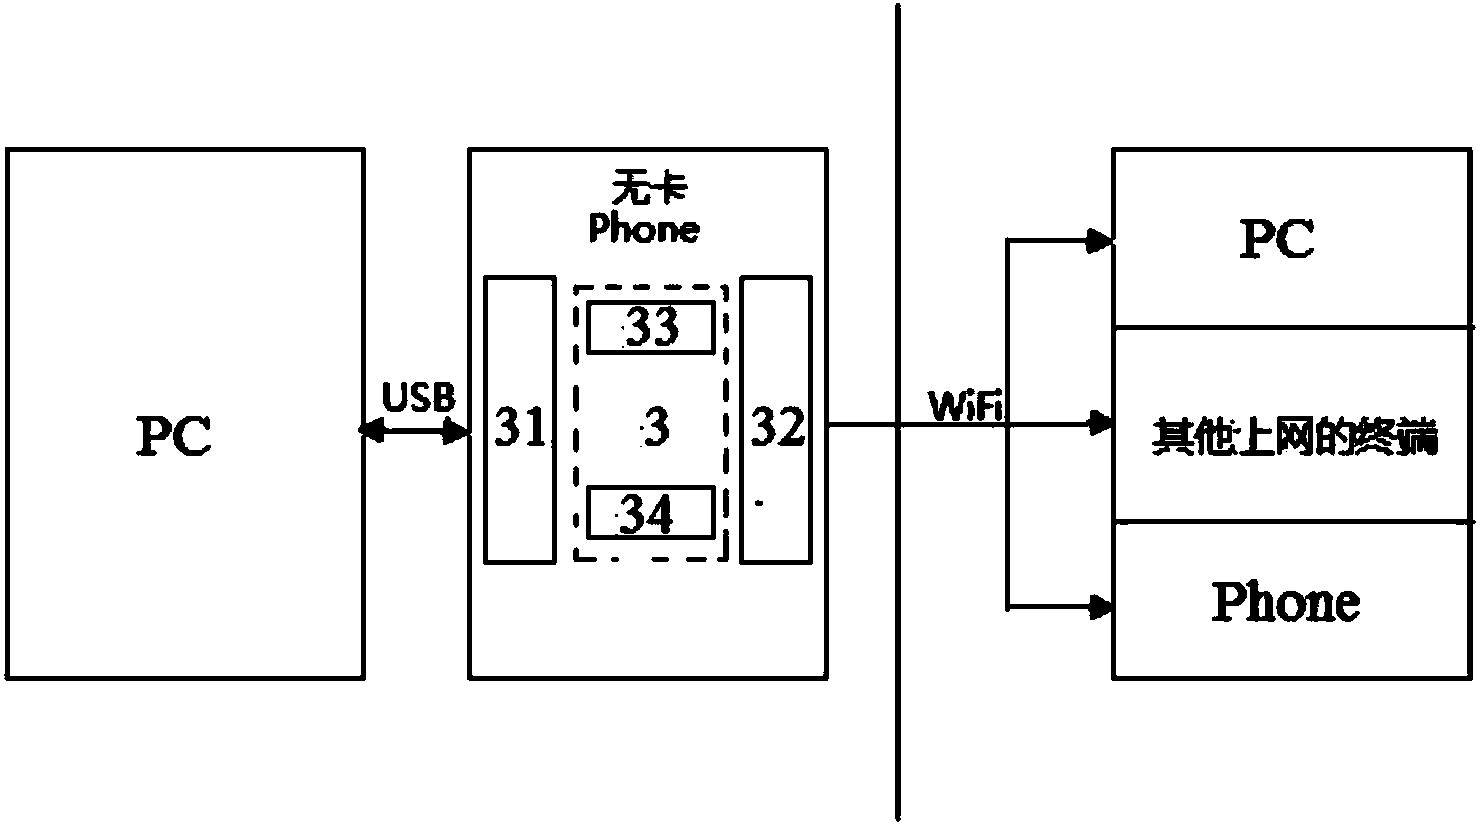 Method and device for sharing PC network by virtue of mobile phone